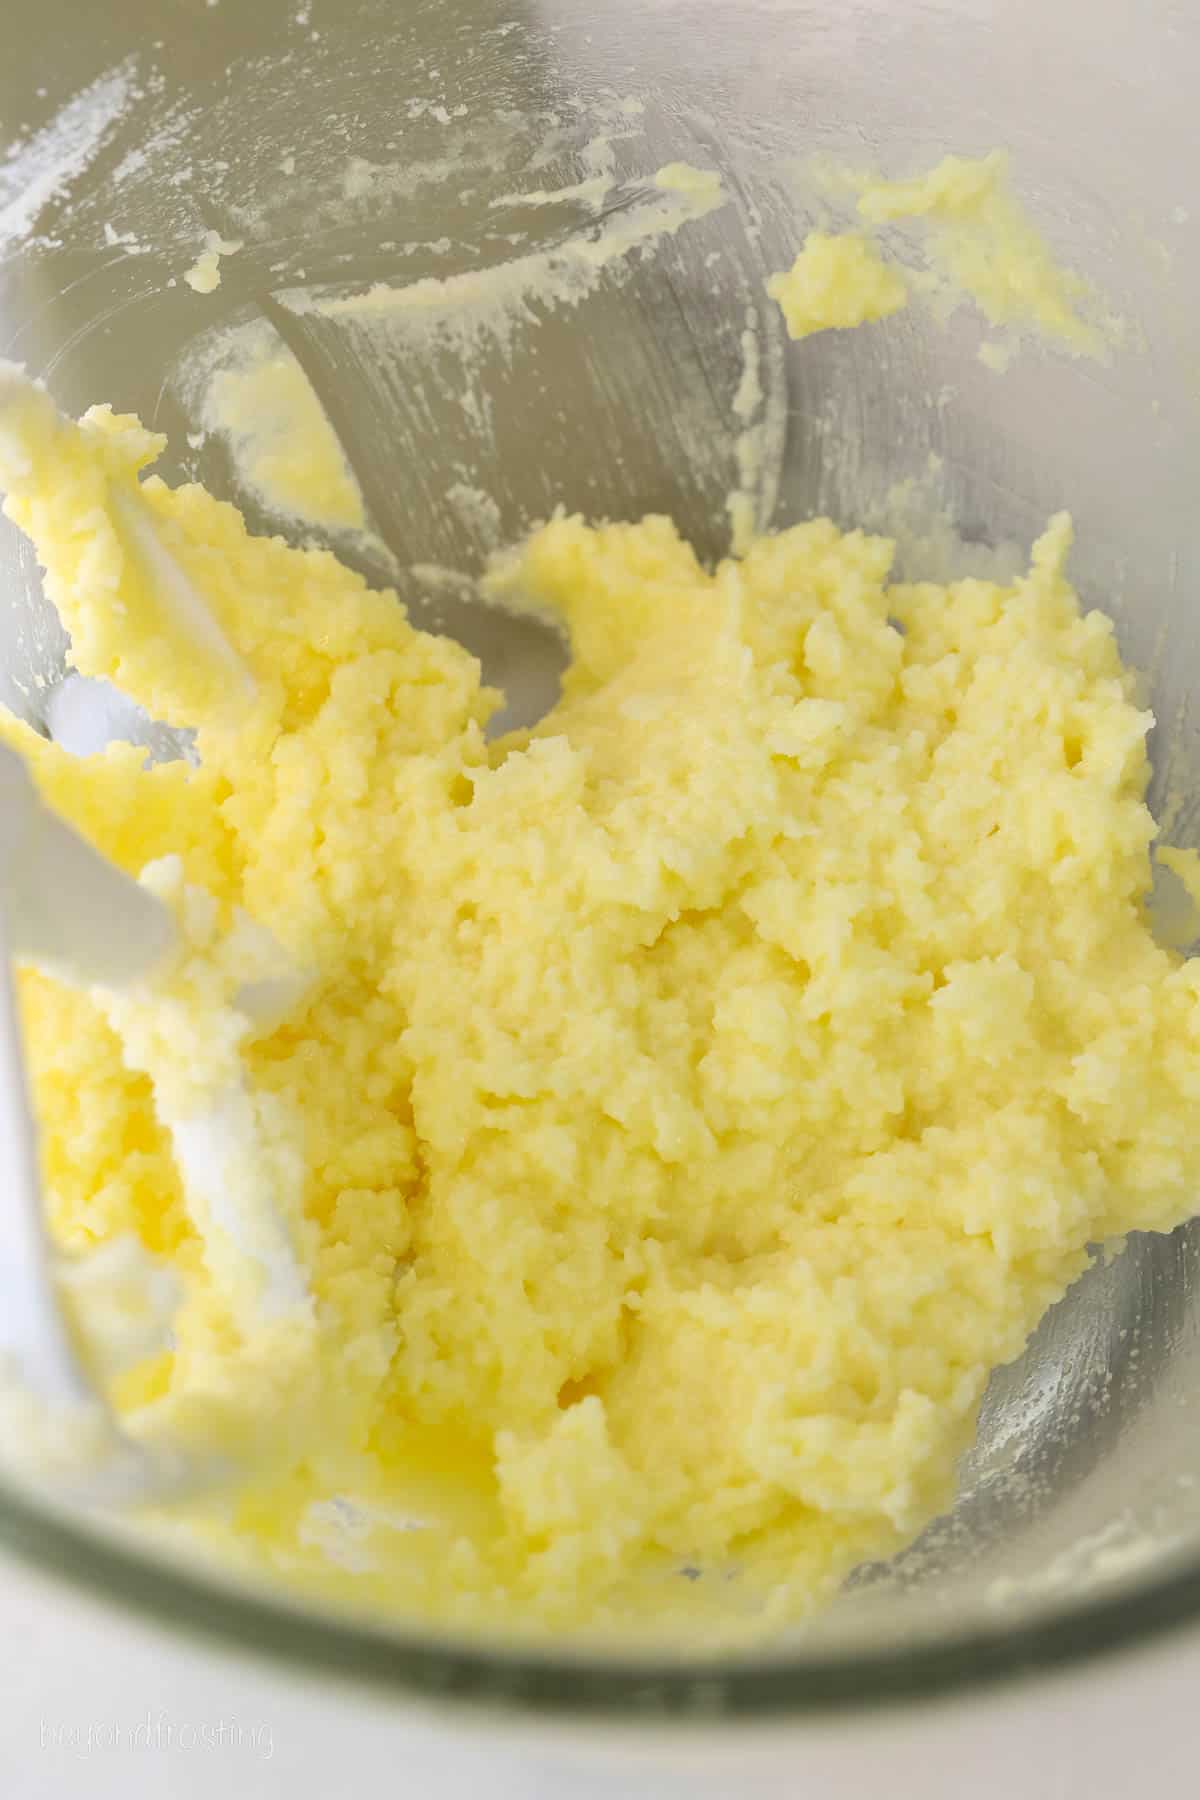 Wet ingredients for almond cookie dough are creamed together in the bowl of a stand mixer.